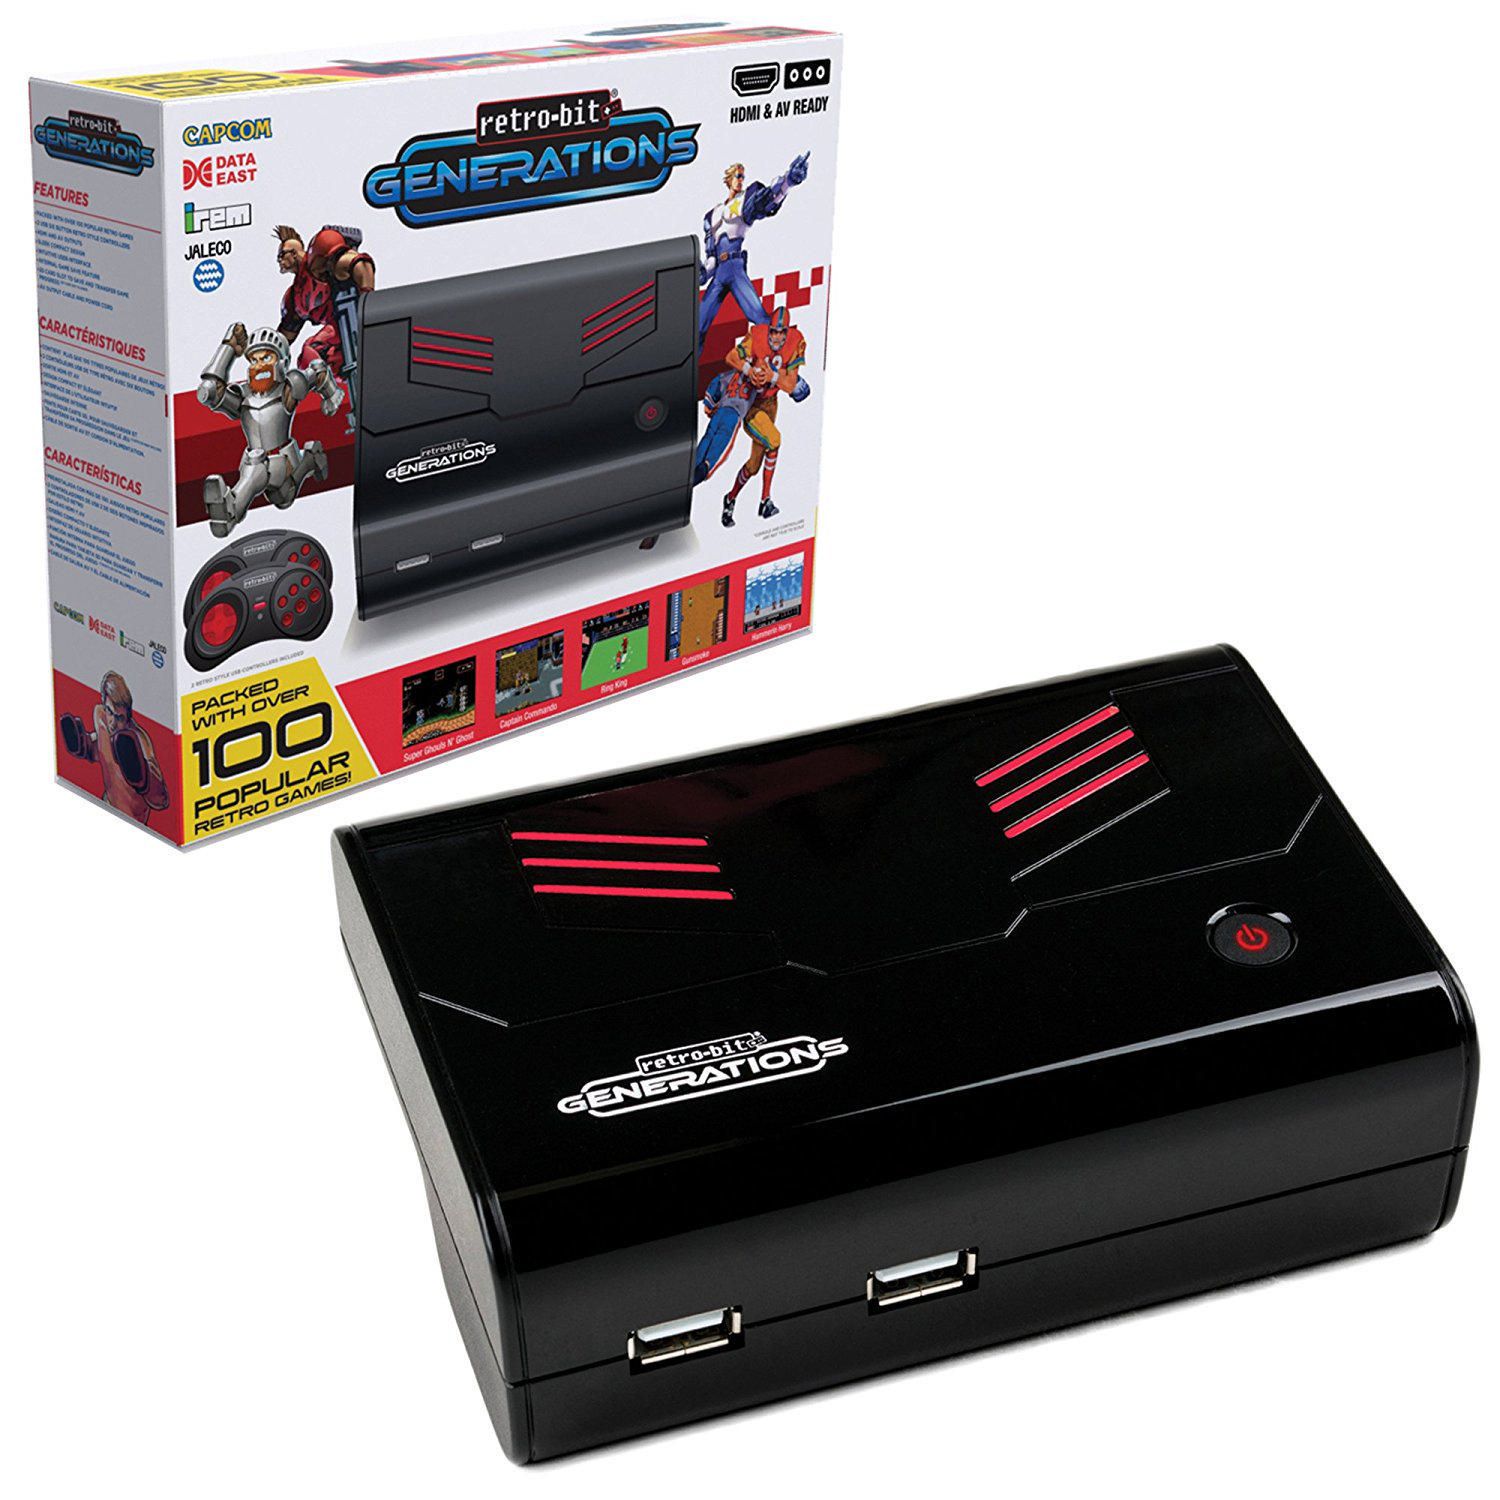 retro gaming system with preloaded games